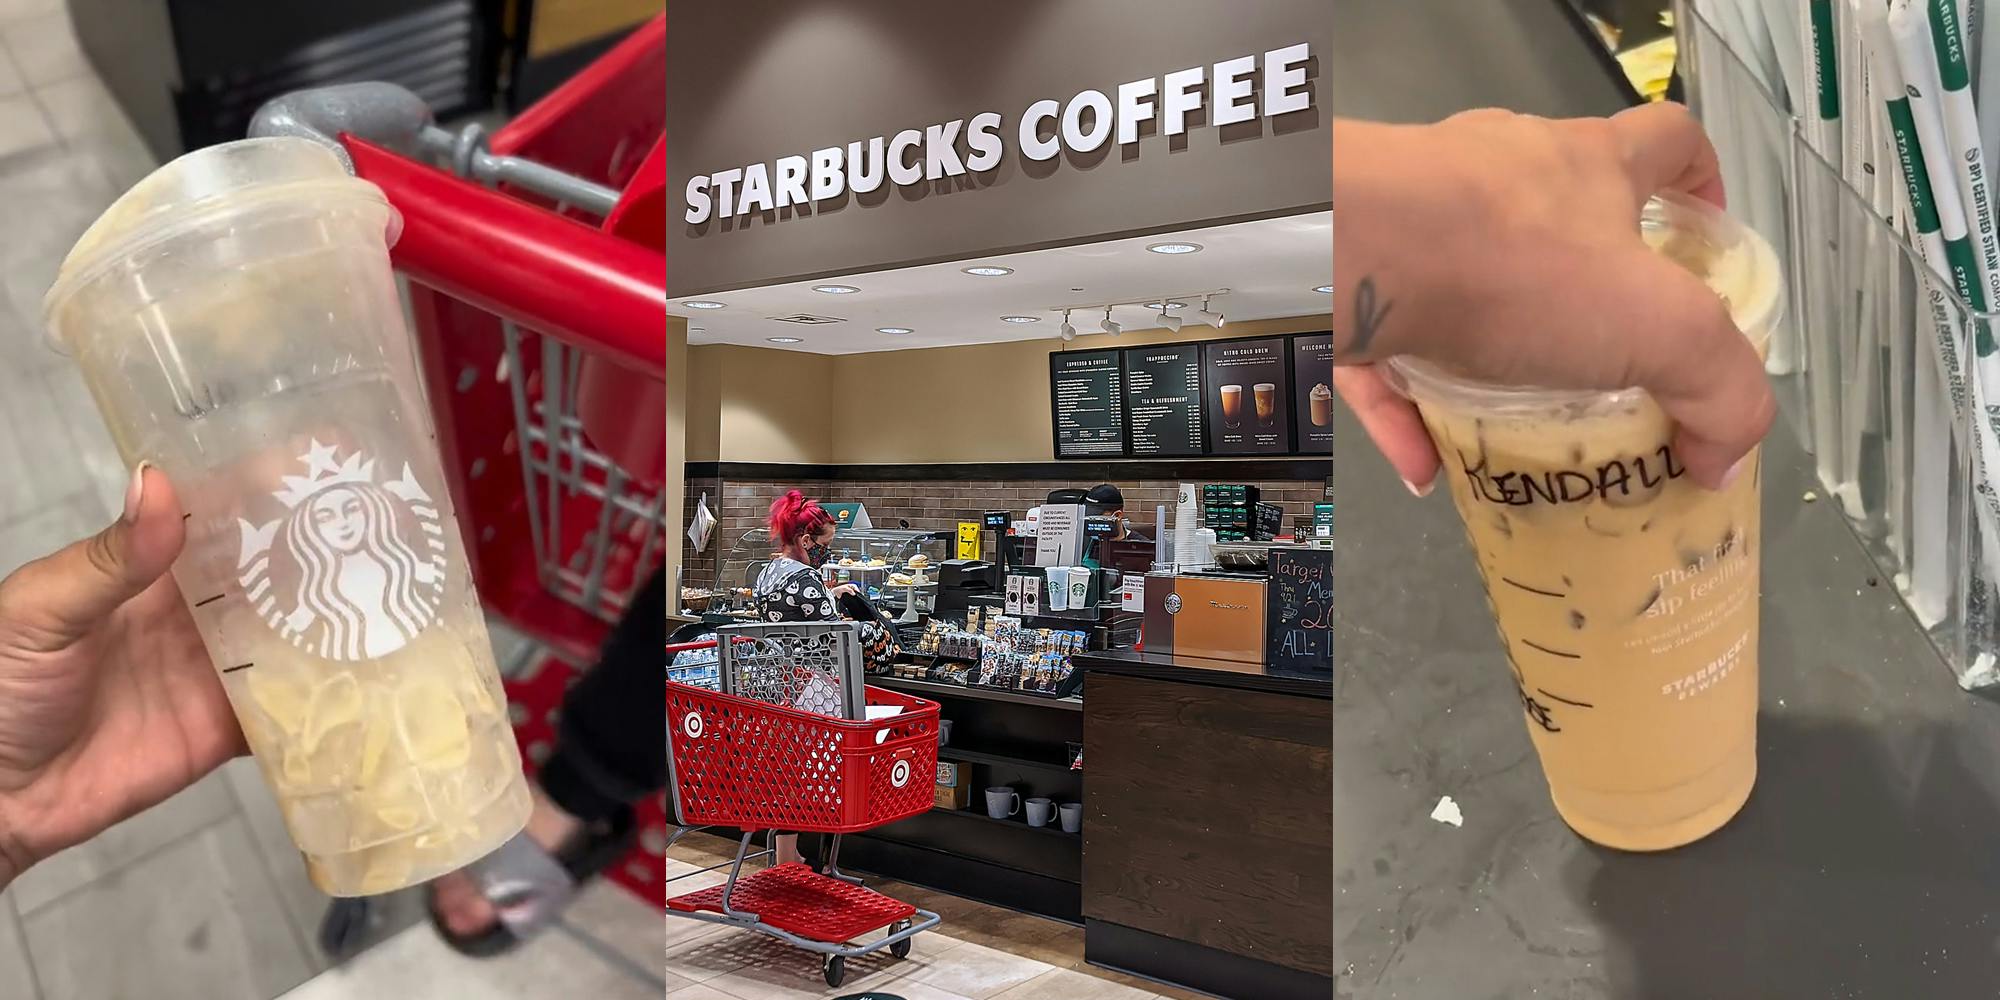 Starbucks cup almost empty in hand (l) Starbucks Coffee inside Target with Target cart (c) Starbucks customer holding refilled drink" (r)